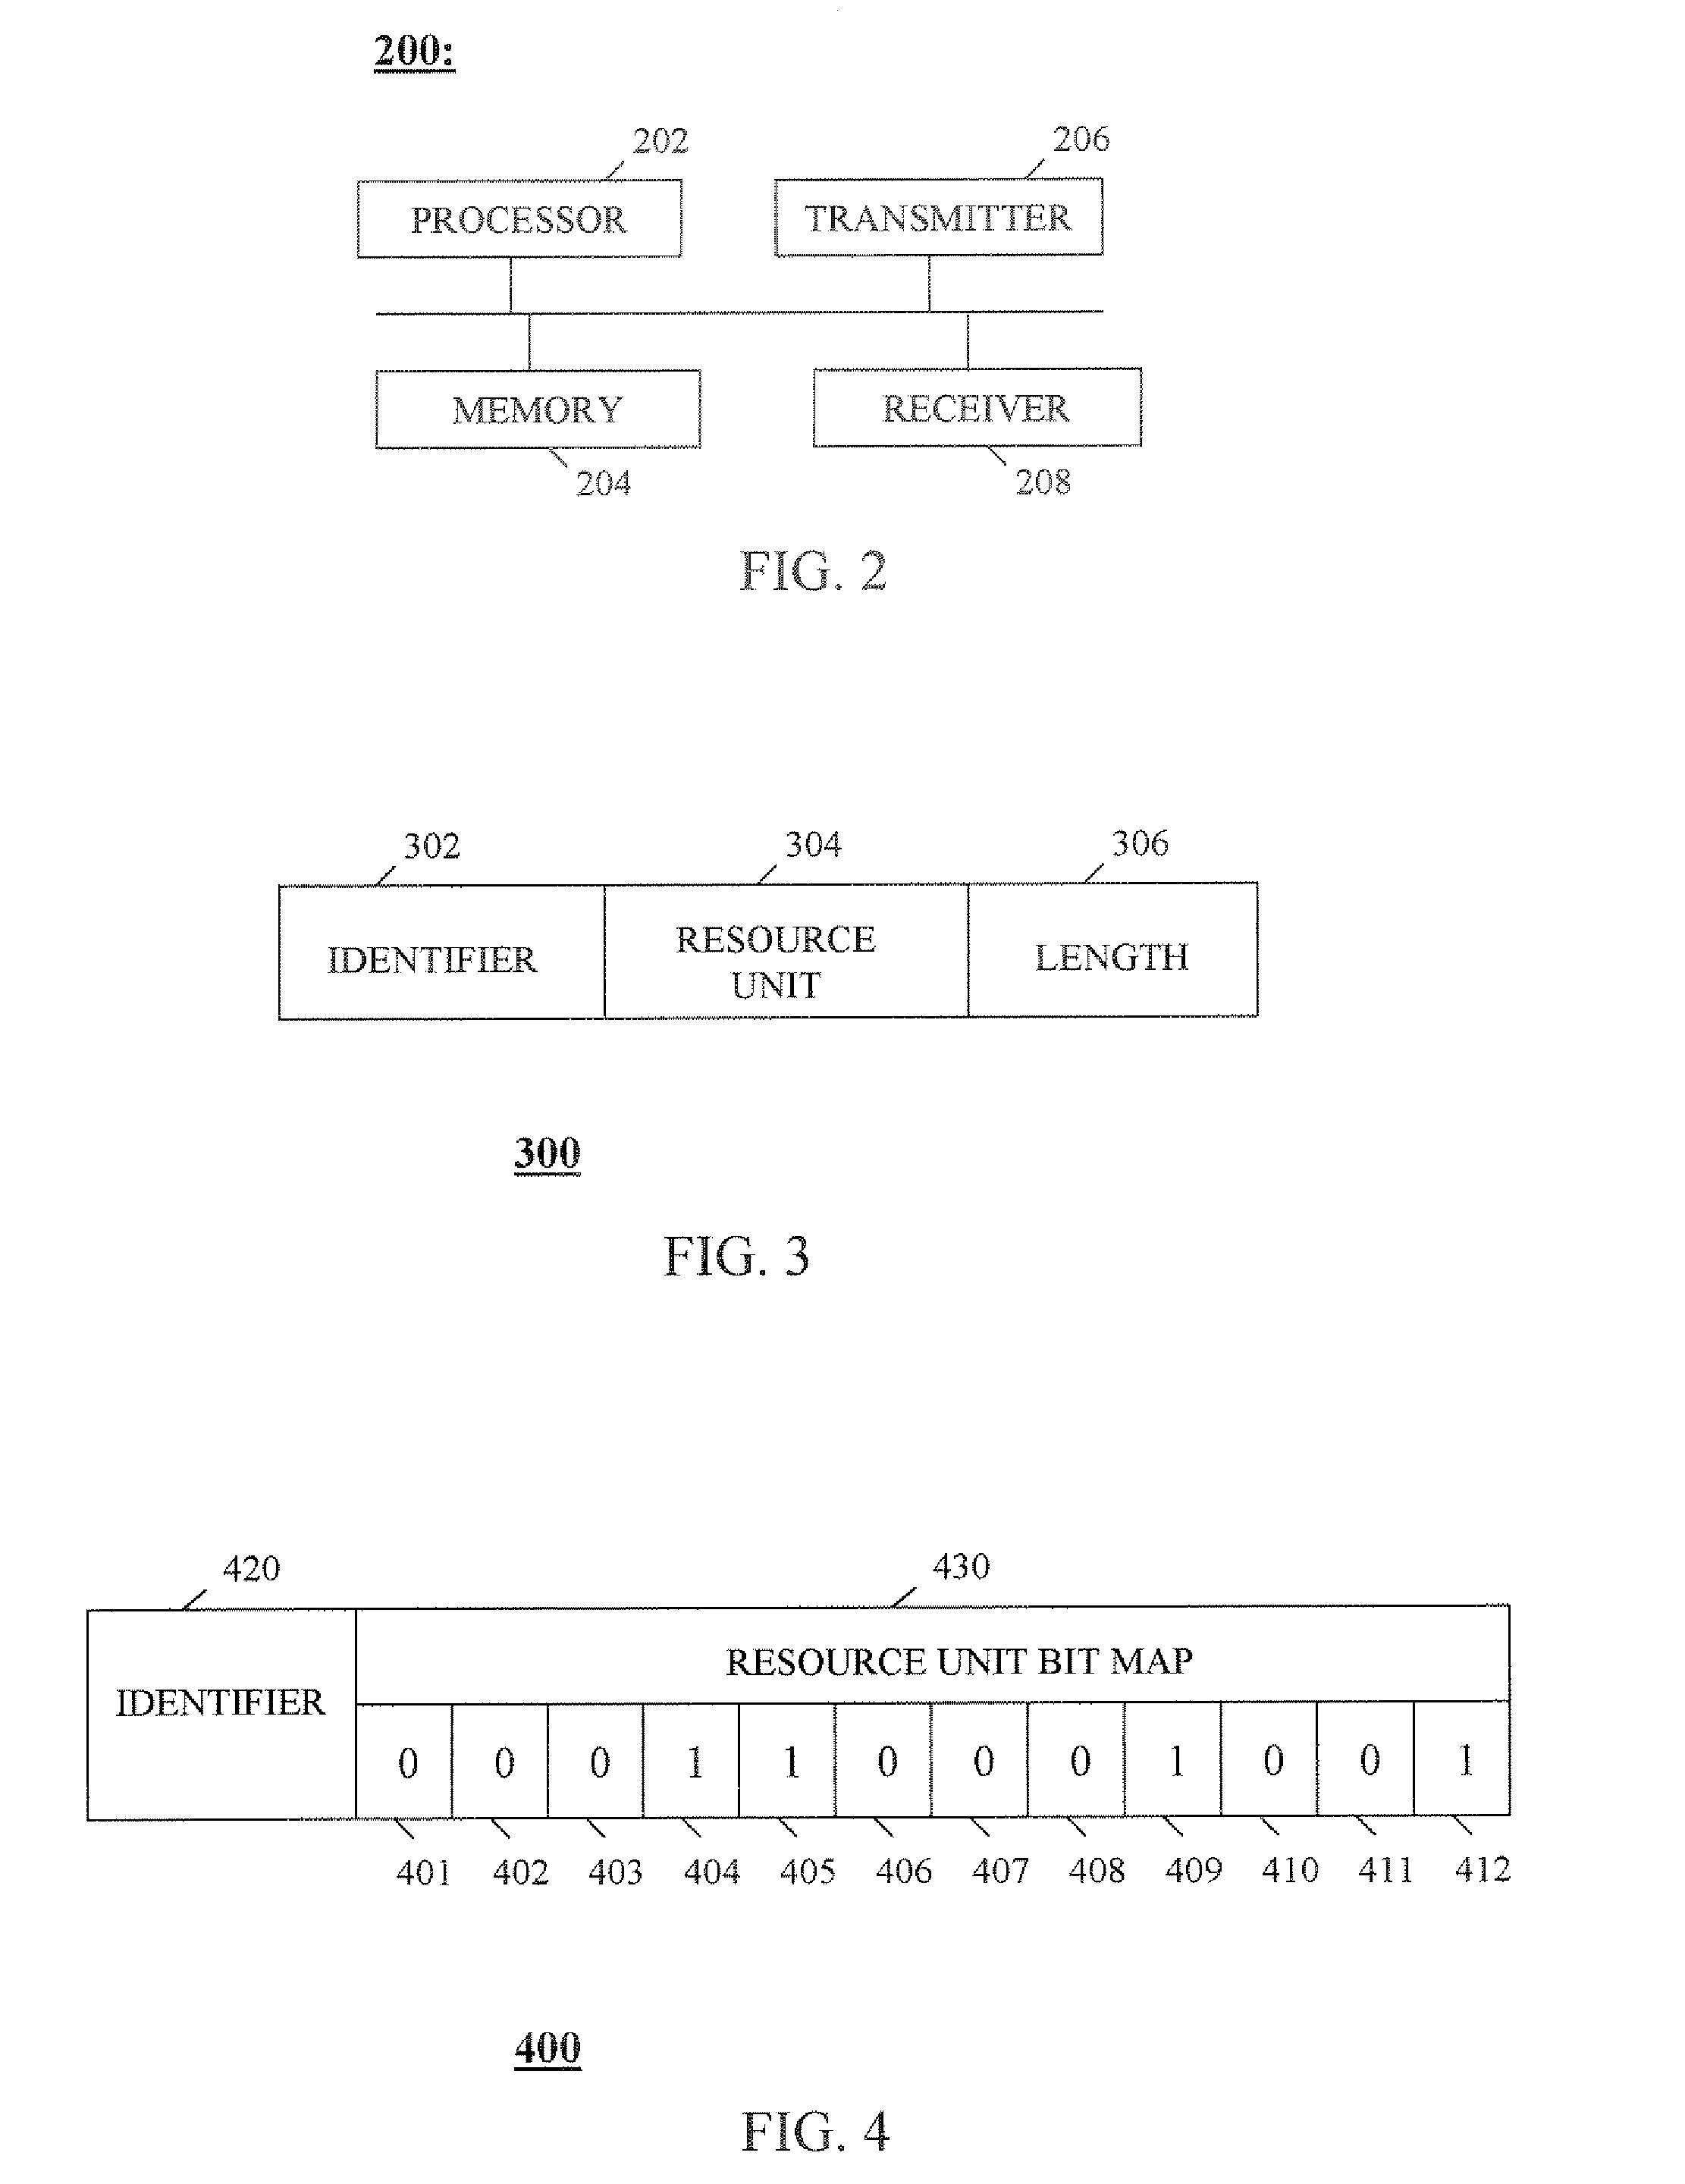 Method and apparatus for providing downlink acknowledgments and transmit indicators in an orthogonal frequency division multiplexing communication system